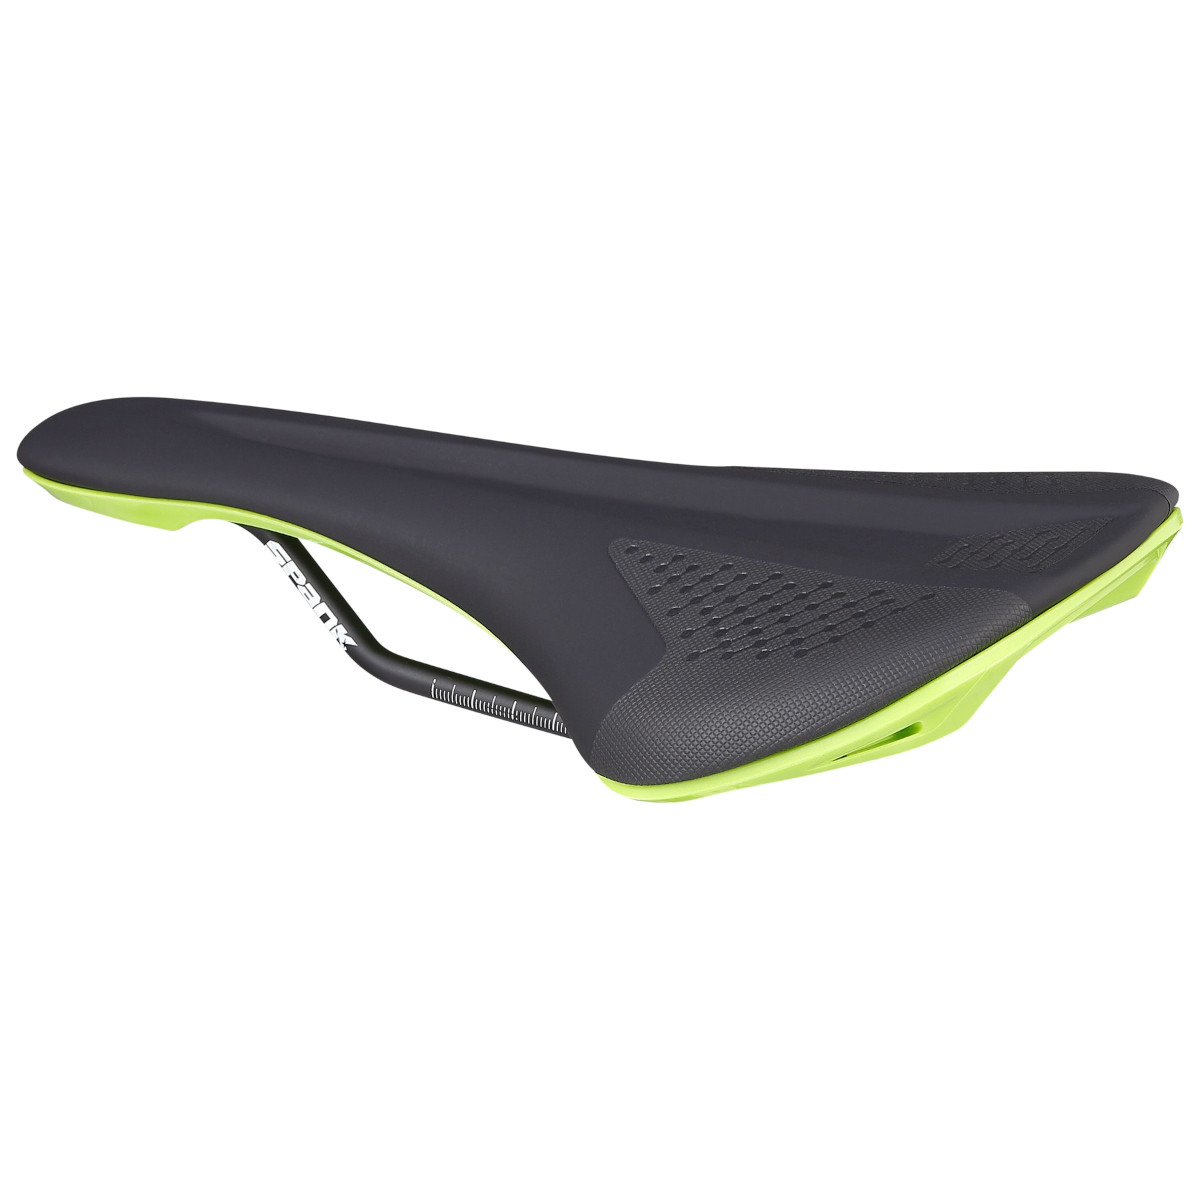 Picture of Spank Spike 160 Saddle - black/green